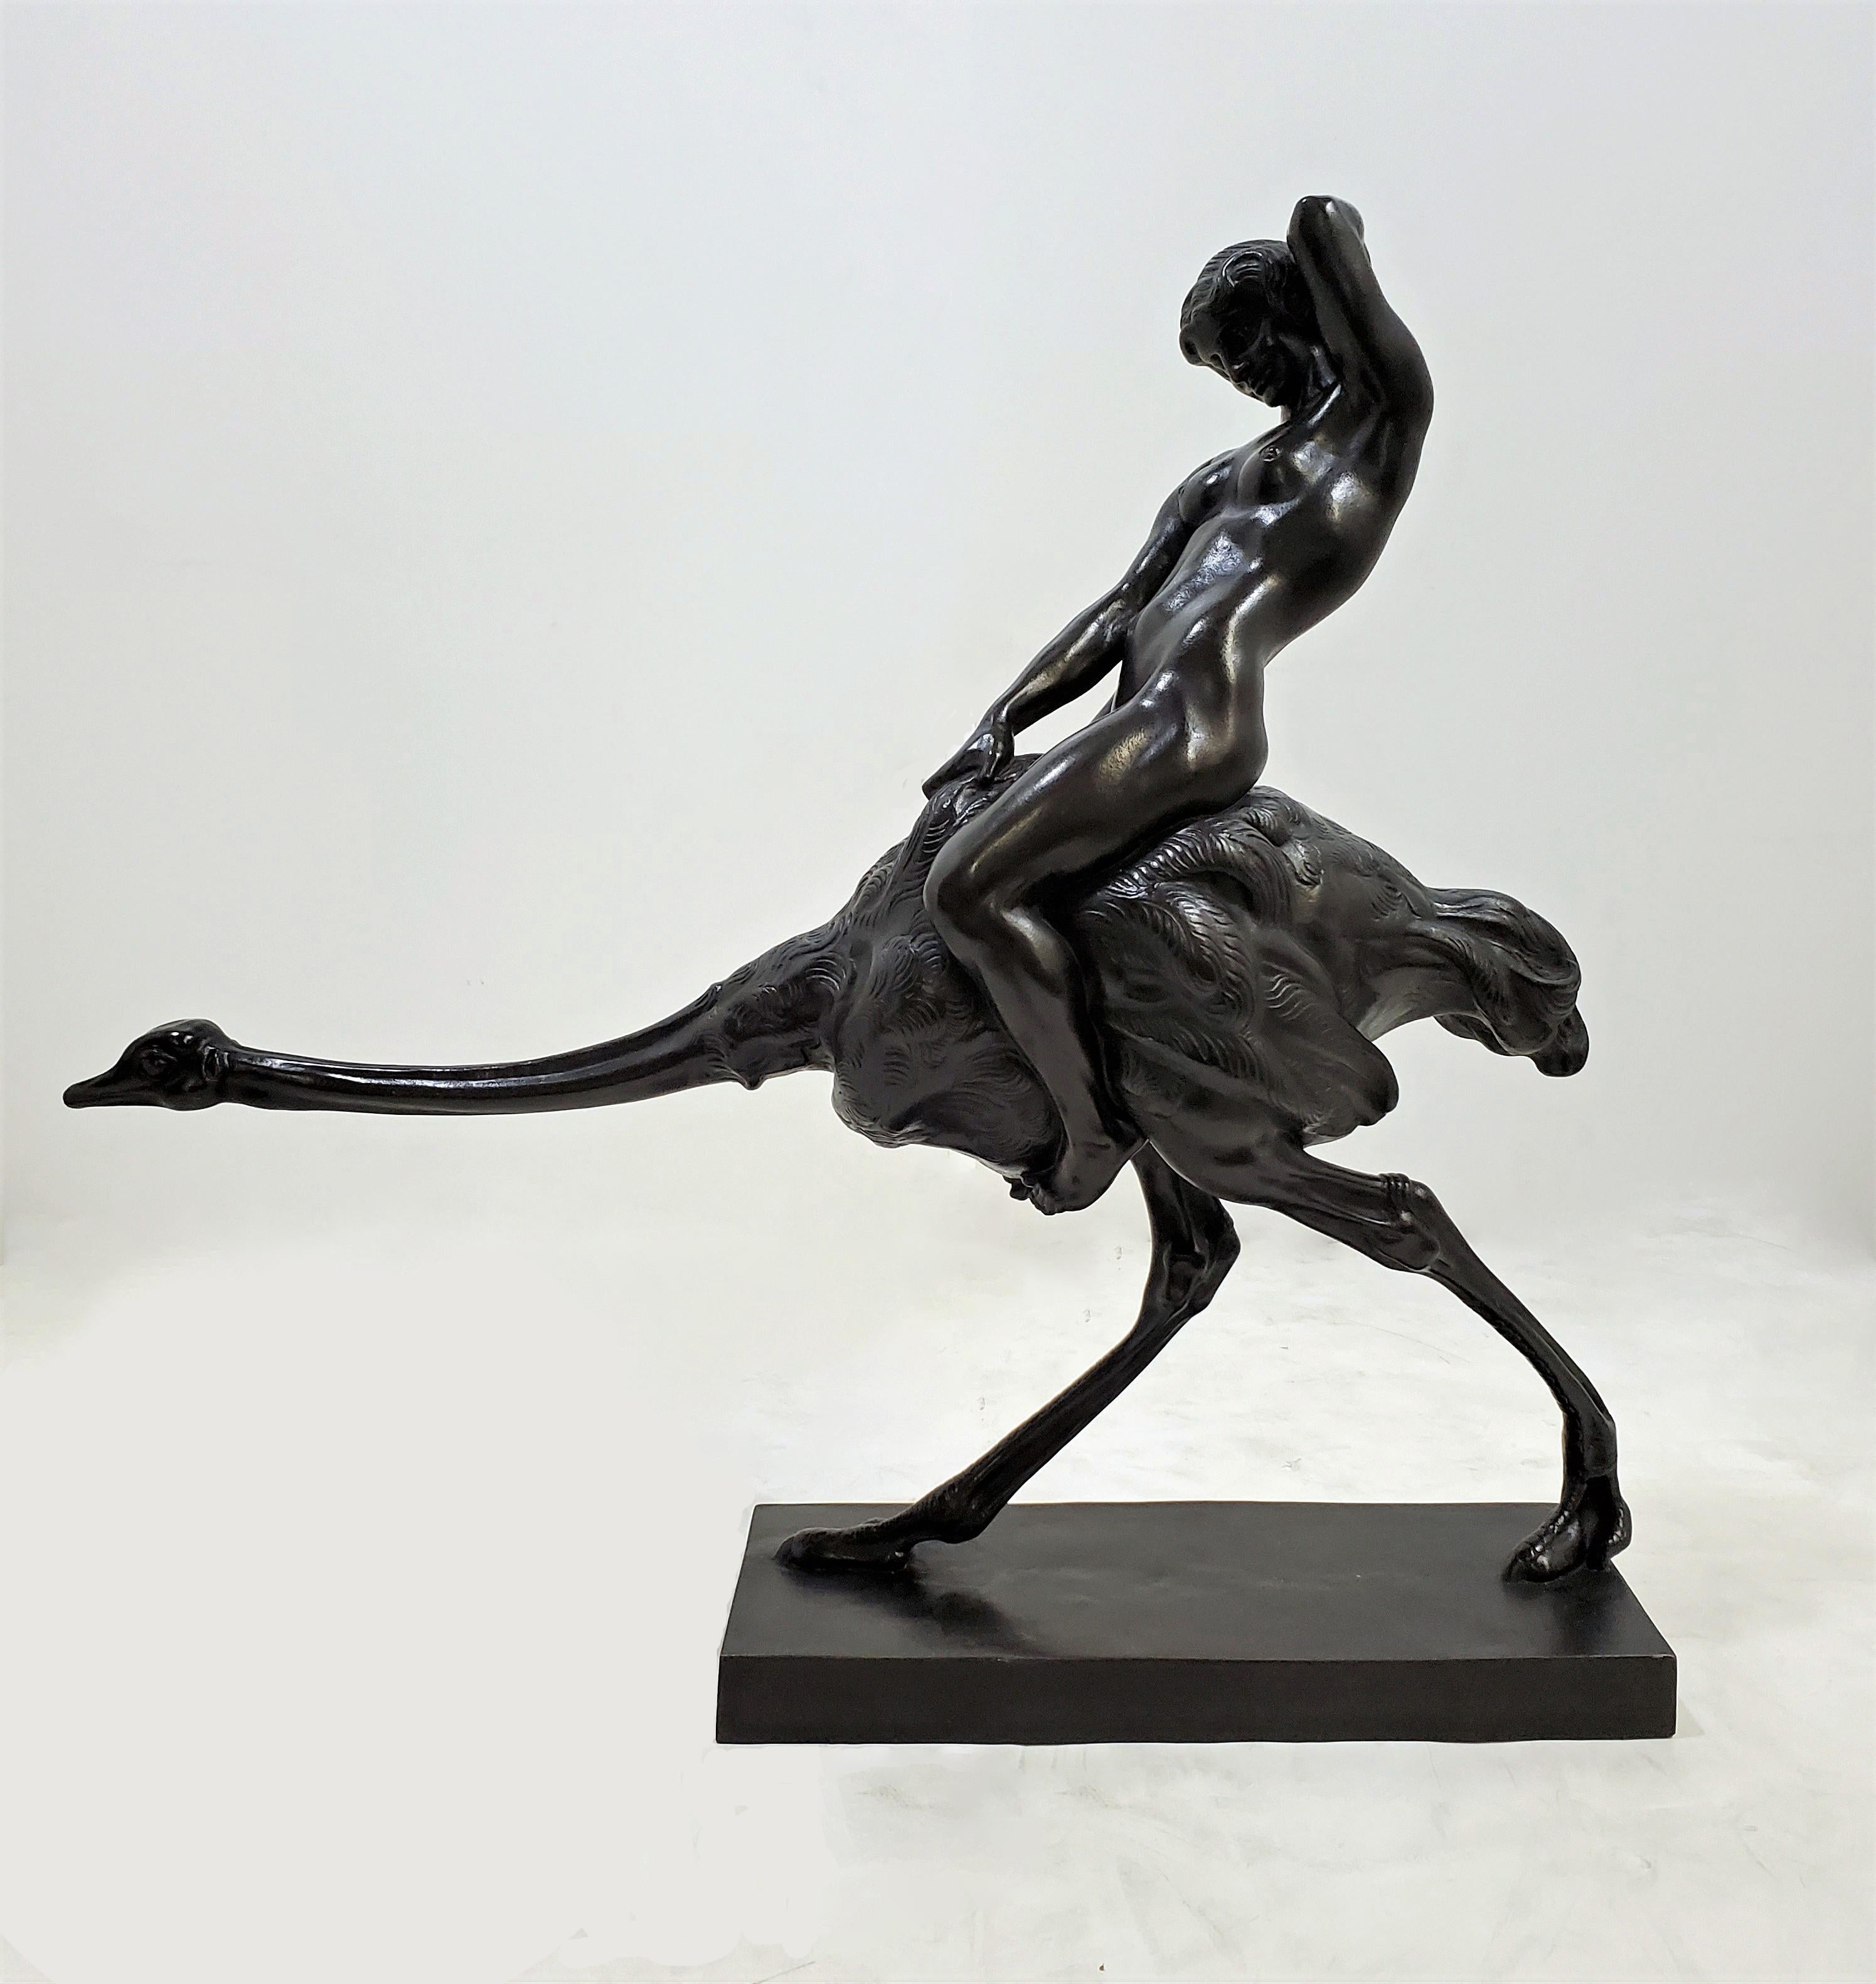 A large and rare bronze sculpture by Ferdinand Liebermann 1883–1941, of a female nude riding an ostrich running with neck outstretched. 
The whimsical bird is naturally portrayed, flightless but with great speed and powerful legs. The erotic